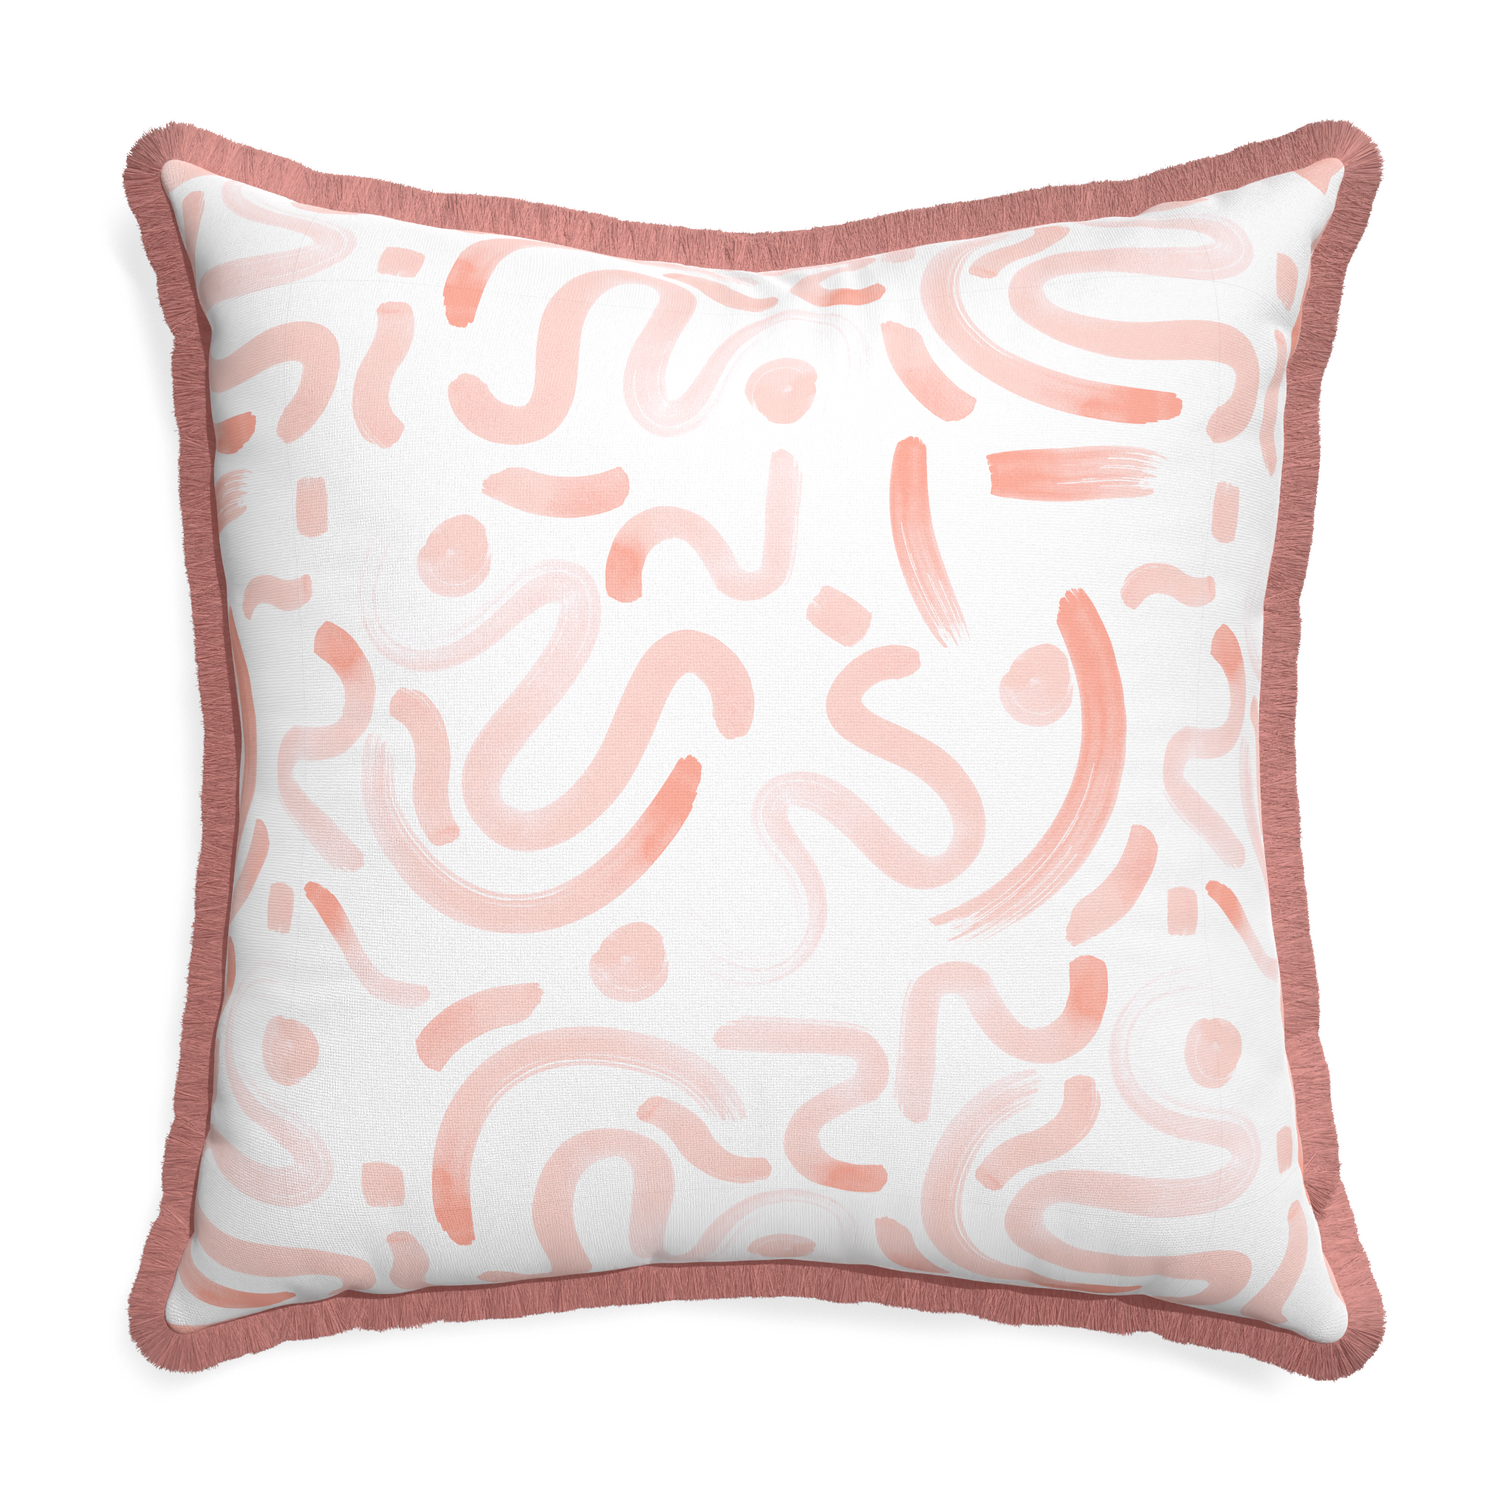 Euro-sham hockney pink custom pink graphicpillow with d fringe on white background